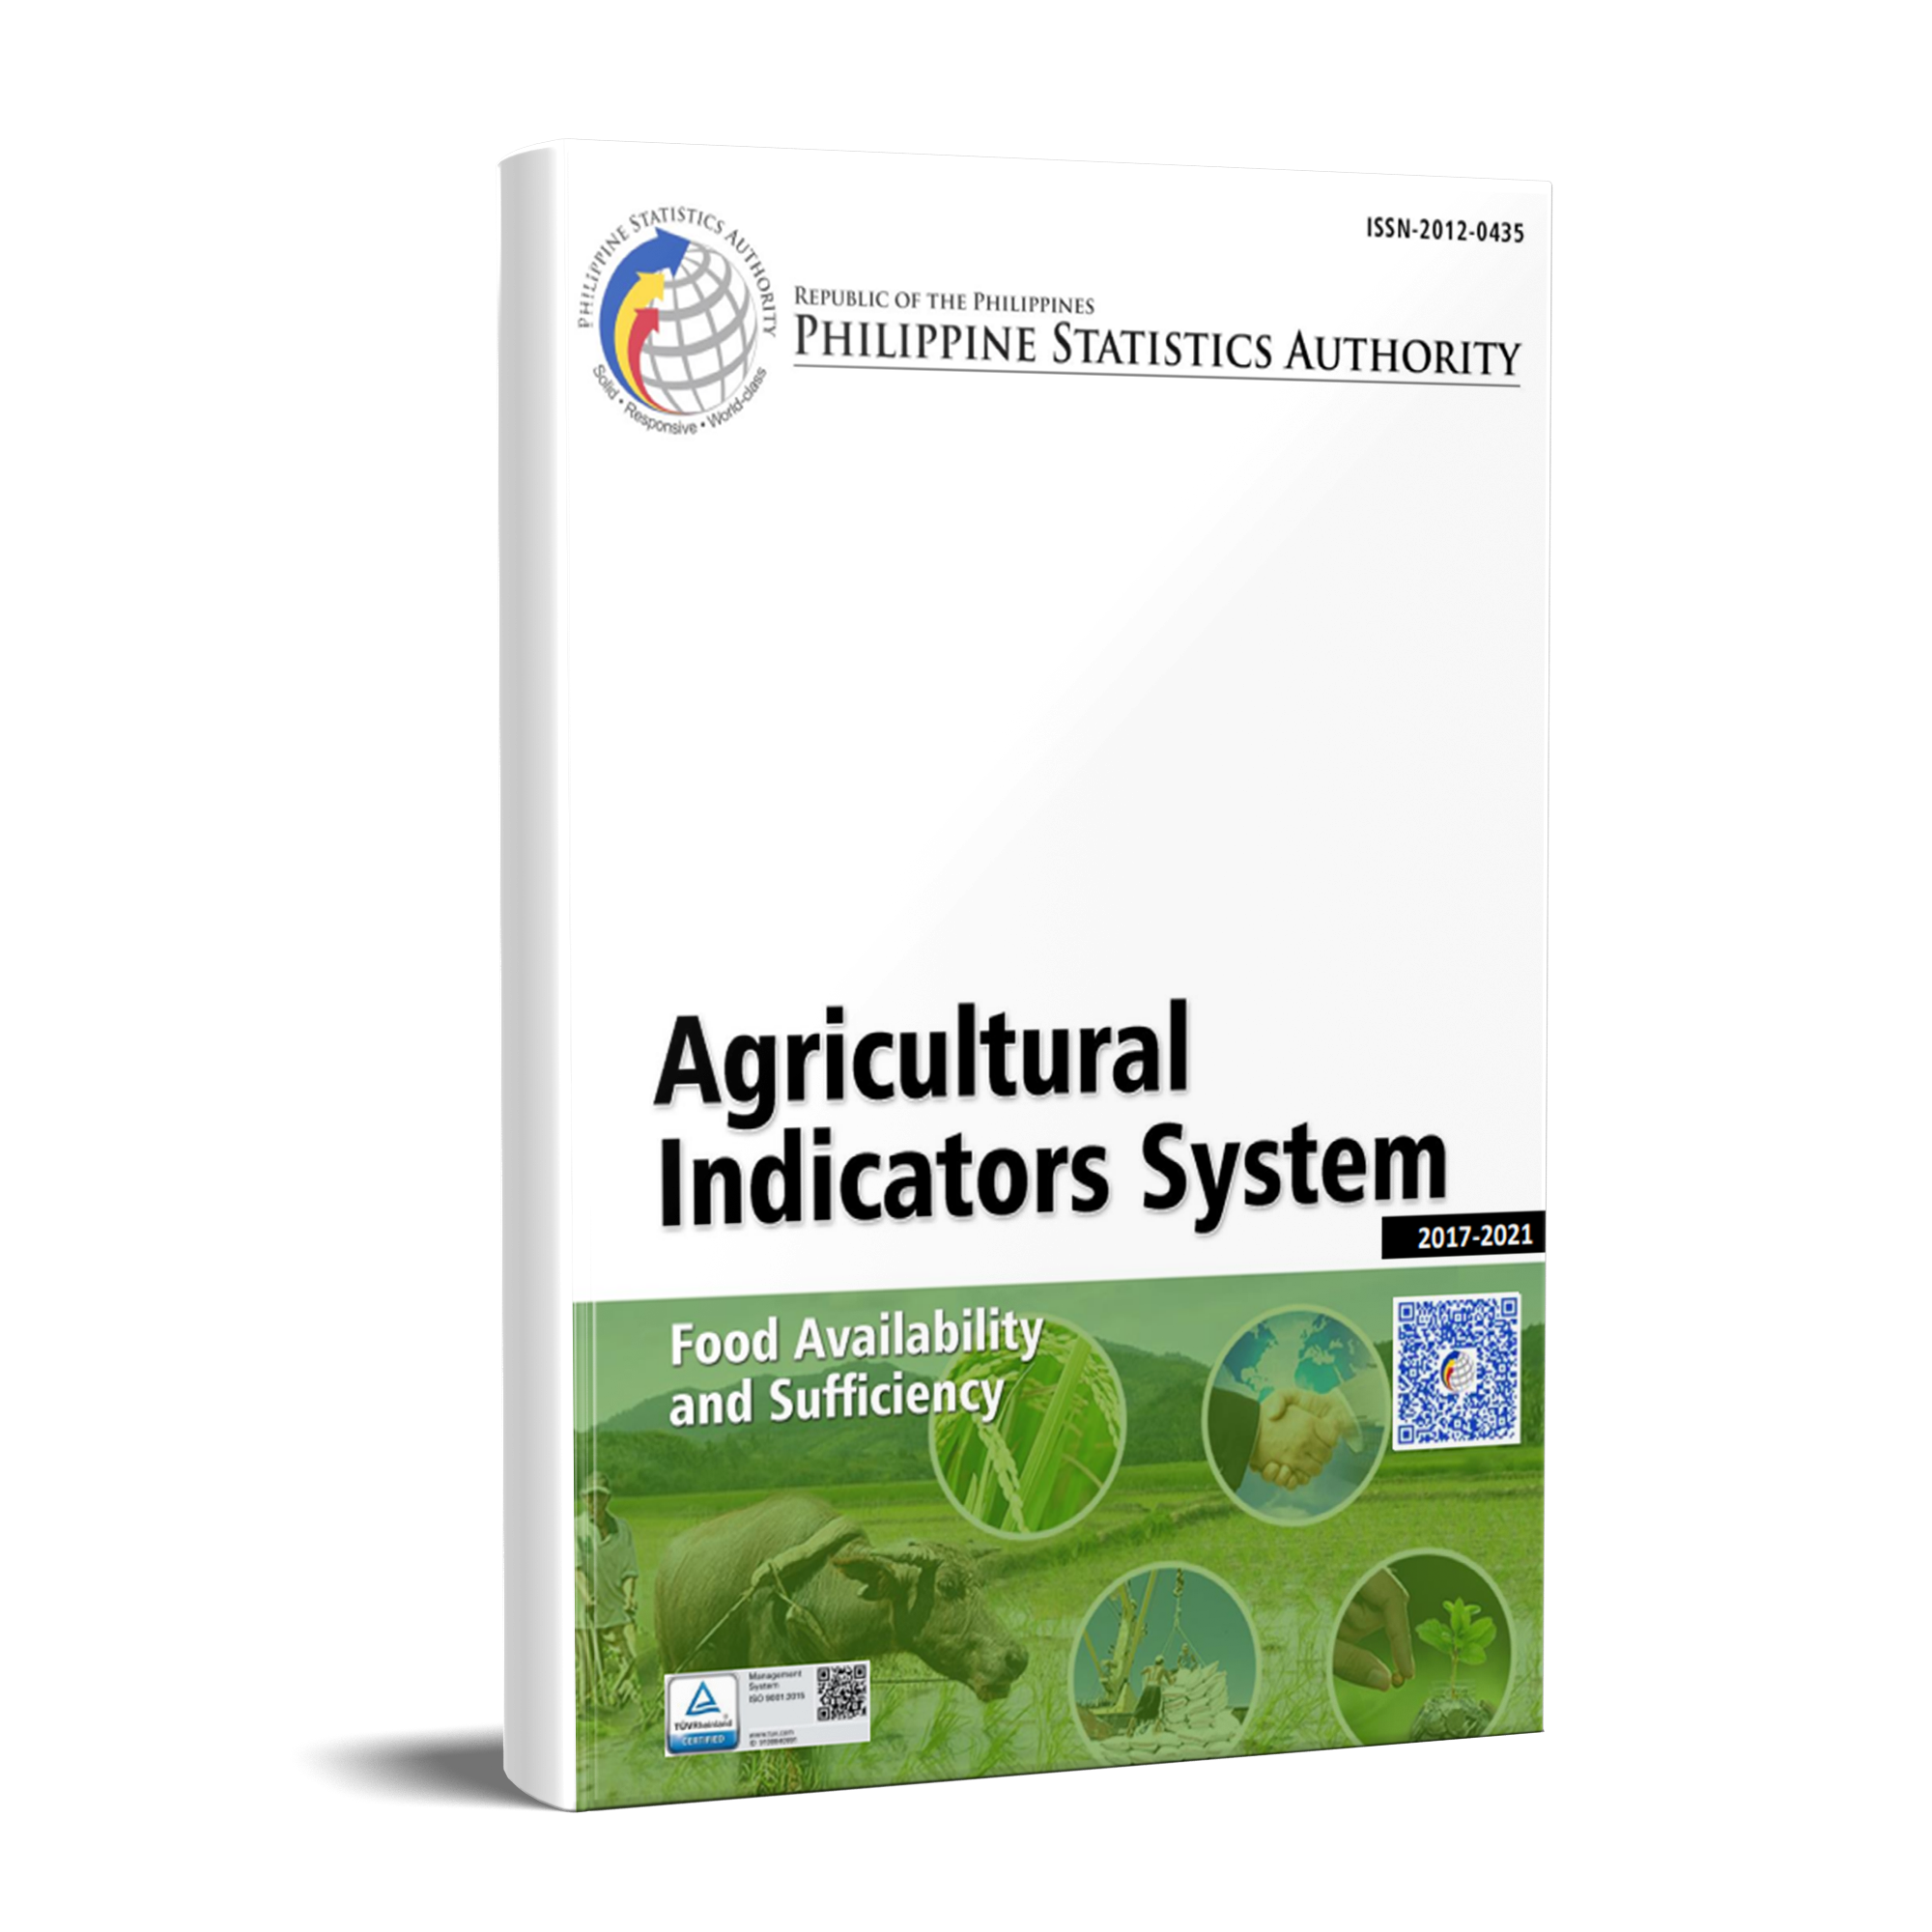 Agricultural Indicators System: Food Availability and Sufficiency